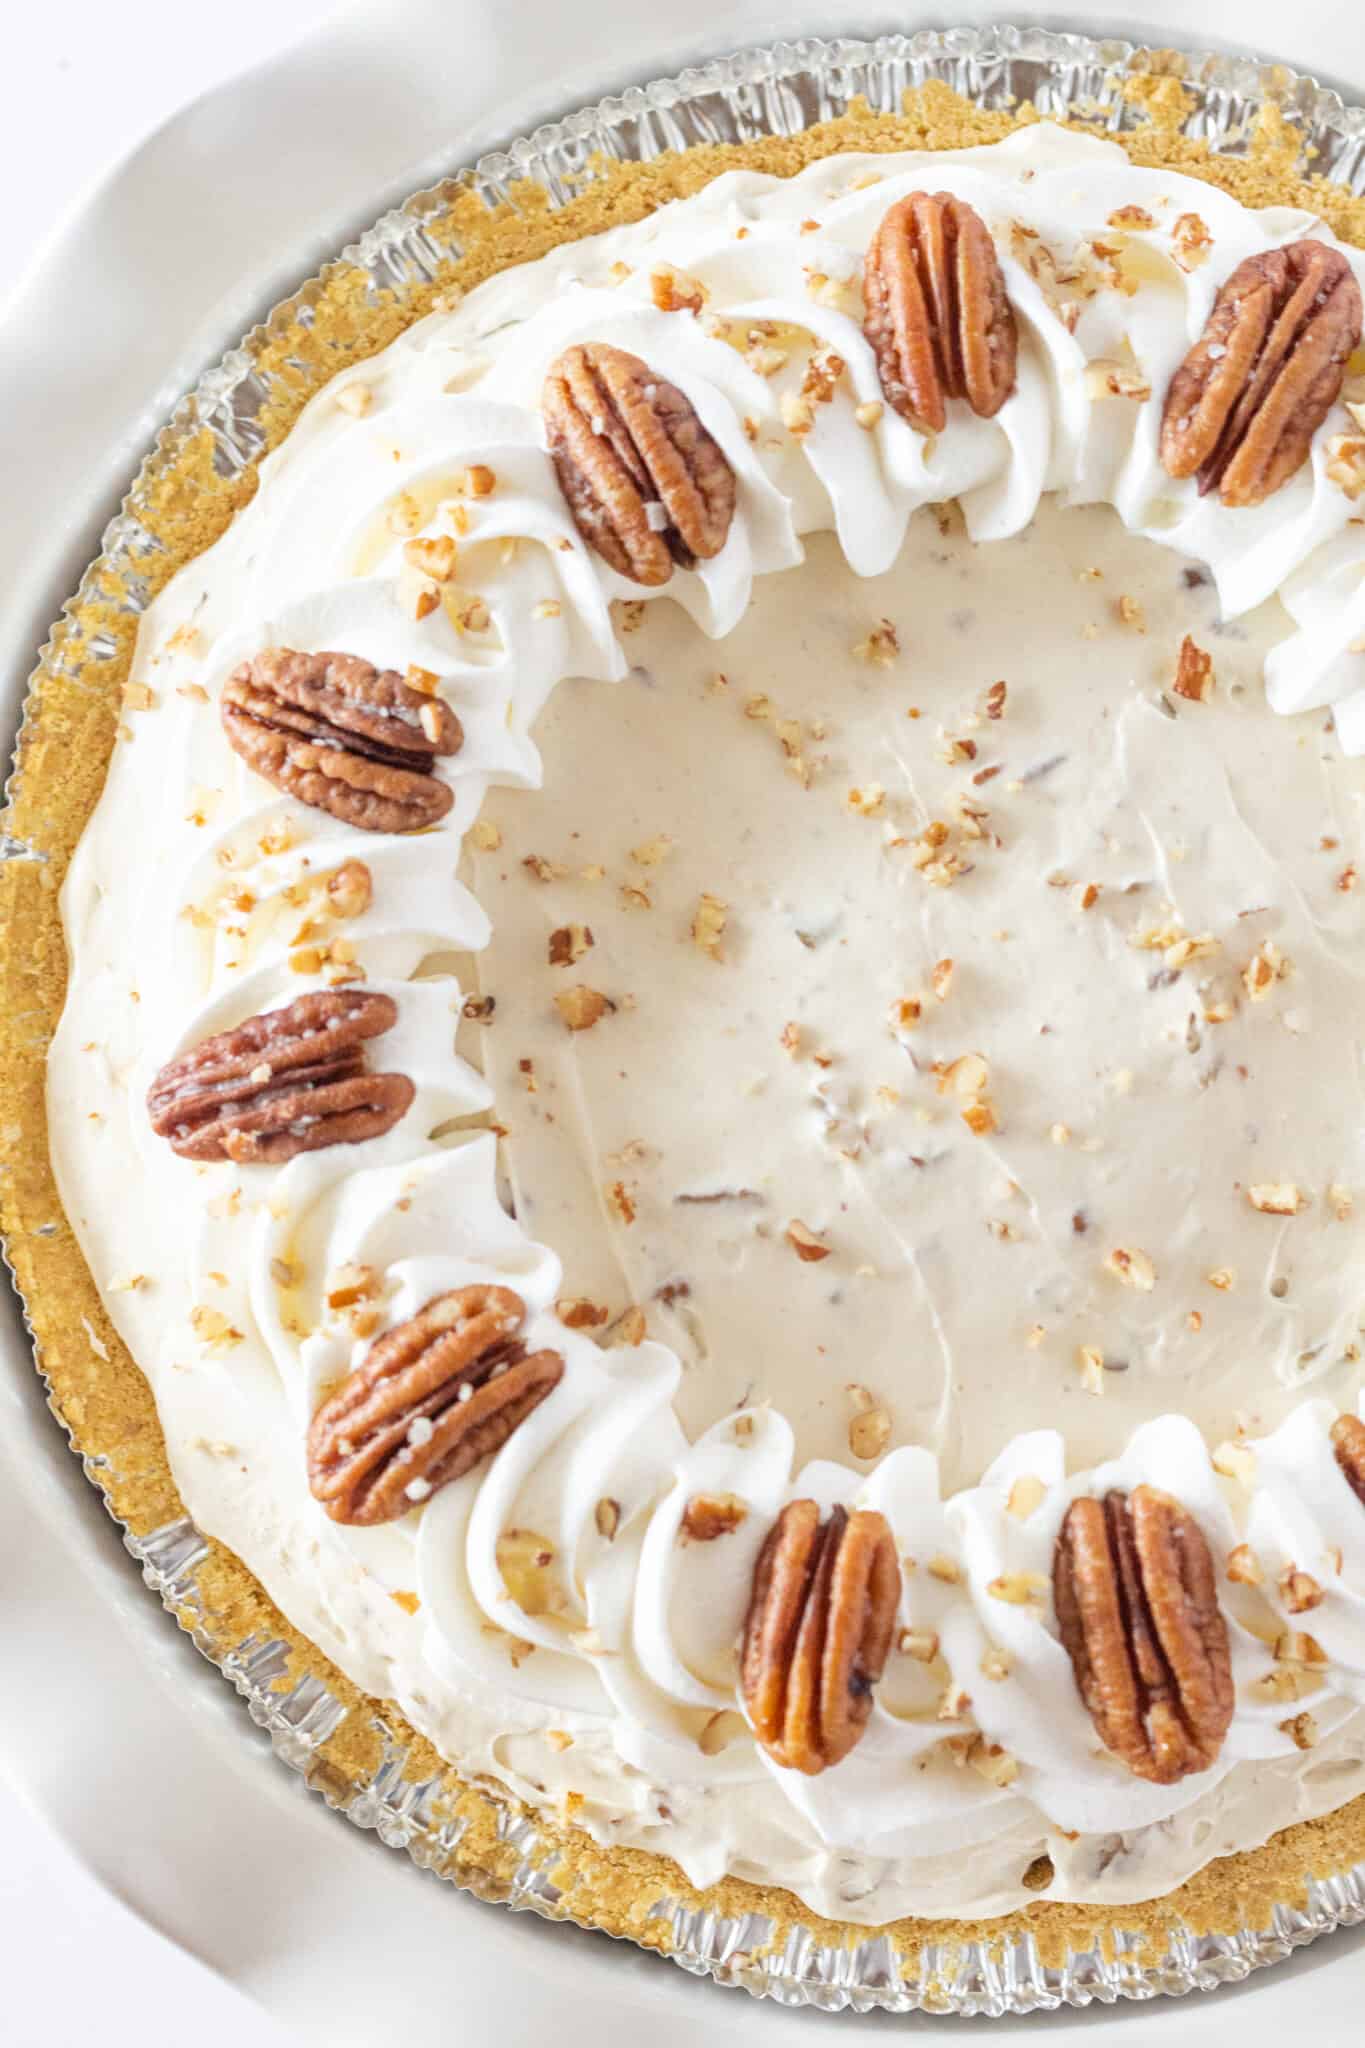 Easy Butter Pecan Cream Pie Recipe with Cream Cheese perfect for Thanksgiving, featured by top US dessert blogger, Practically Homemade